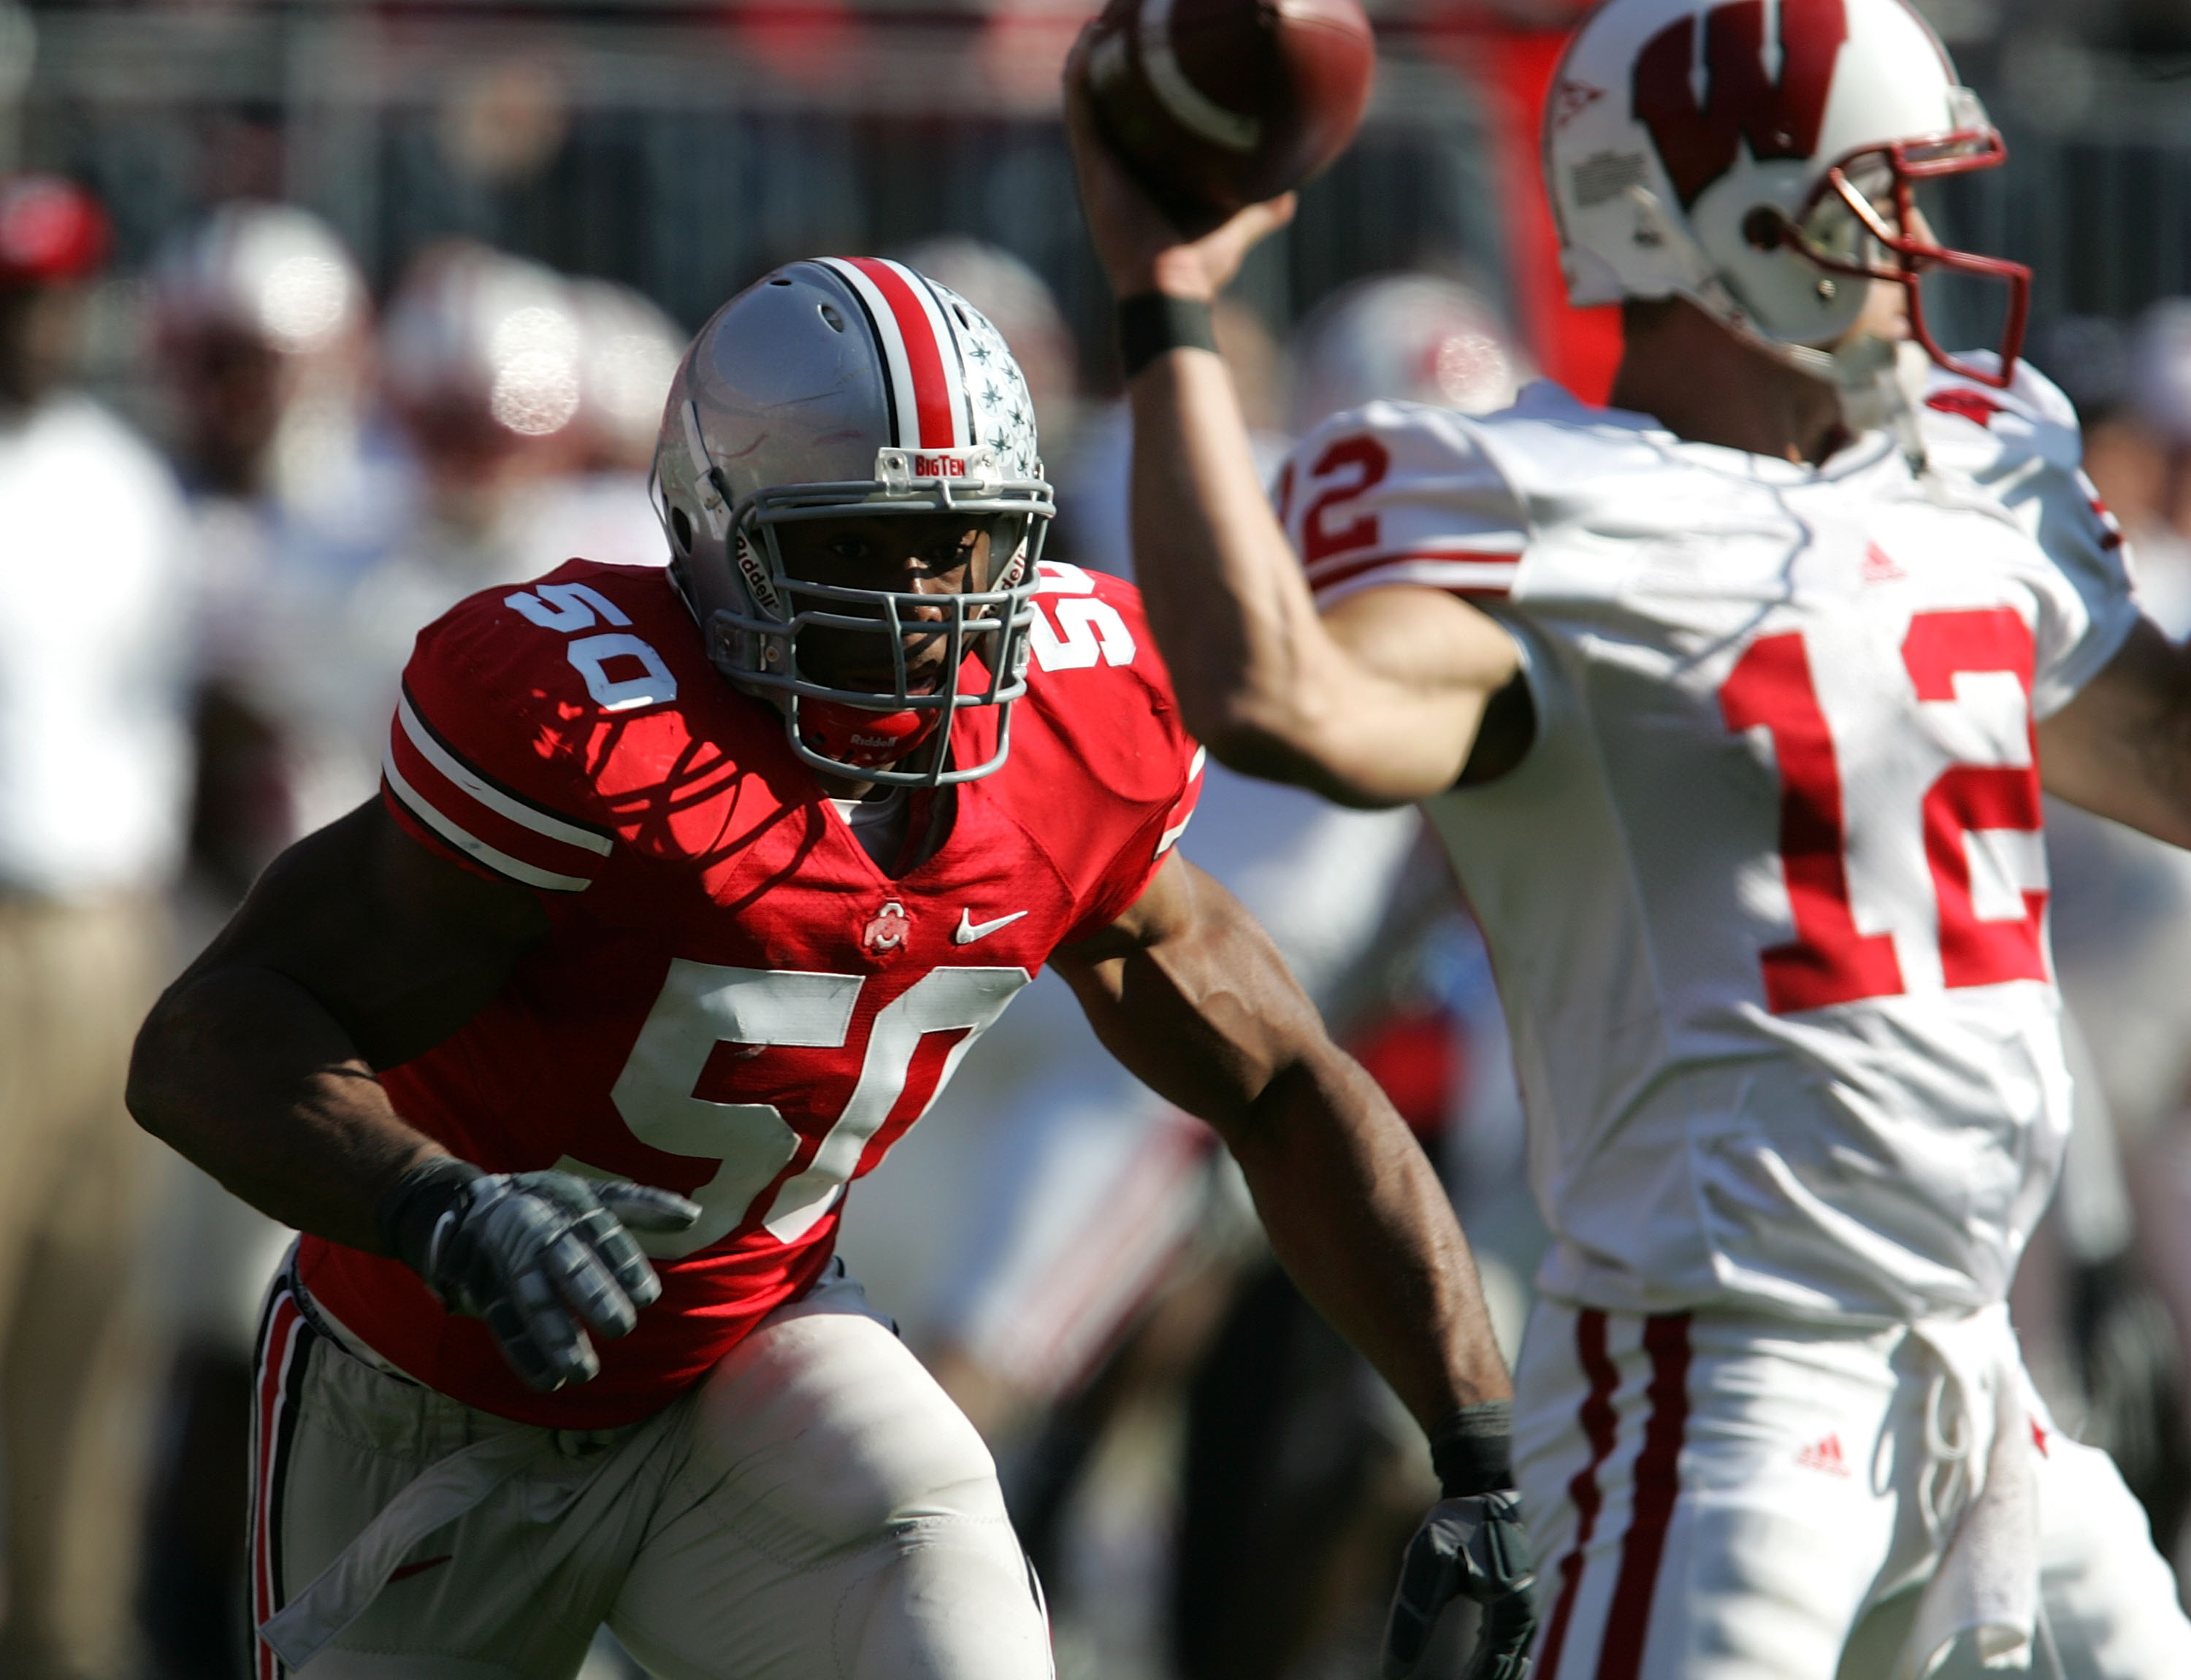 COLUMBUS, OH - NOVEMBER 03: Vernon Gholston #50 of the Ohio State Buckeyes rushes Tyler Donovan #12 of the Wisconsin Badgers on November 3, 2007 at Ohio Stadium in Columbus, Ohio. Ohio State defeated Wisconsin 38-17. (Photo by Jonathan Daniel/Getty Images